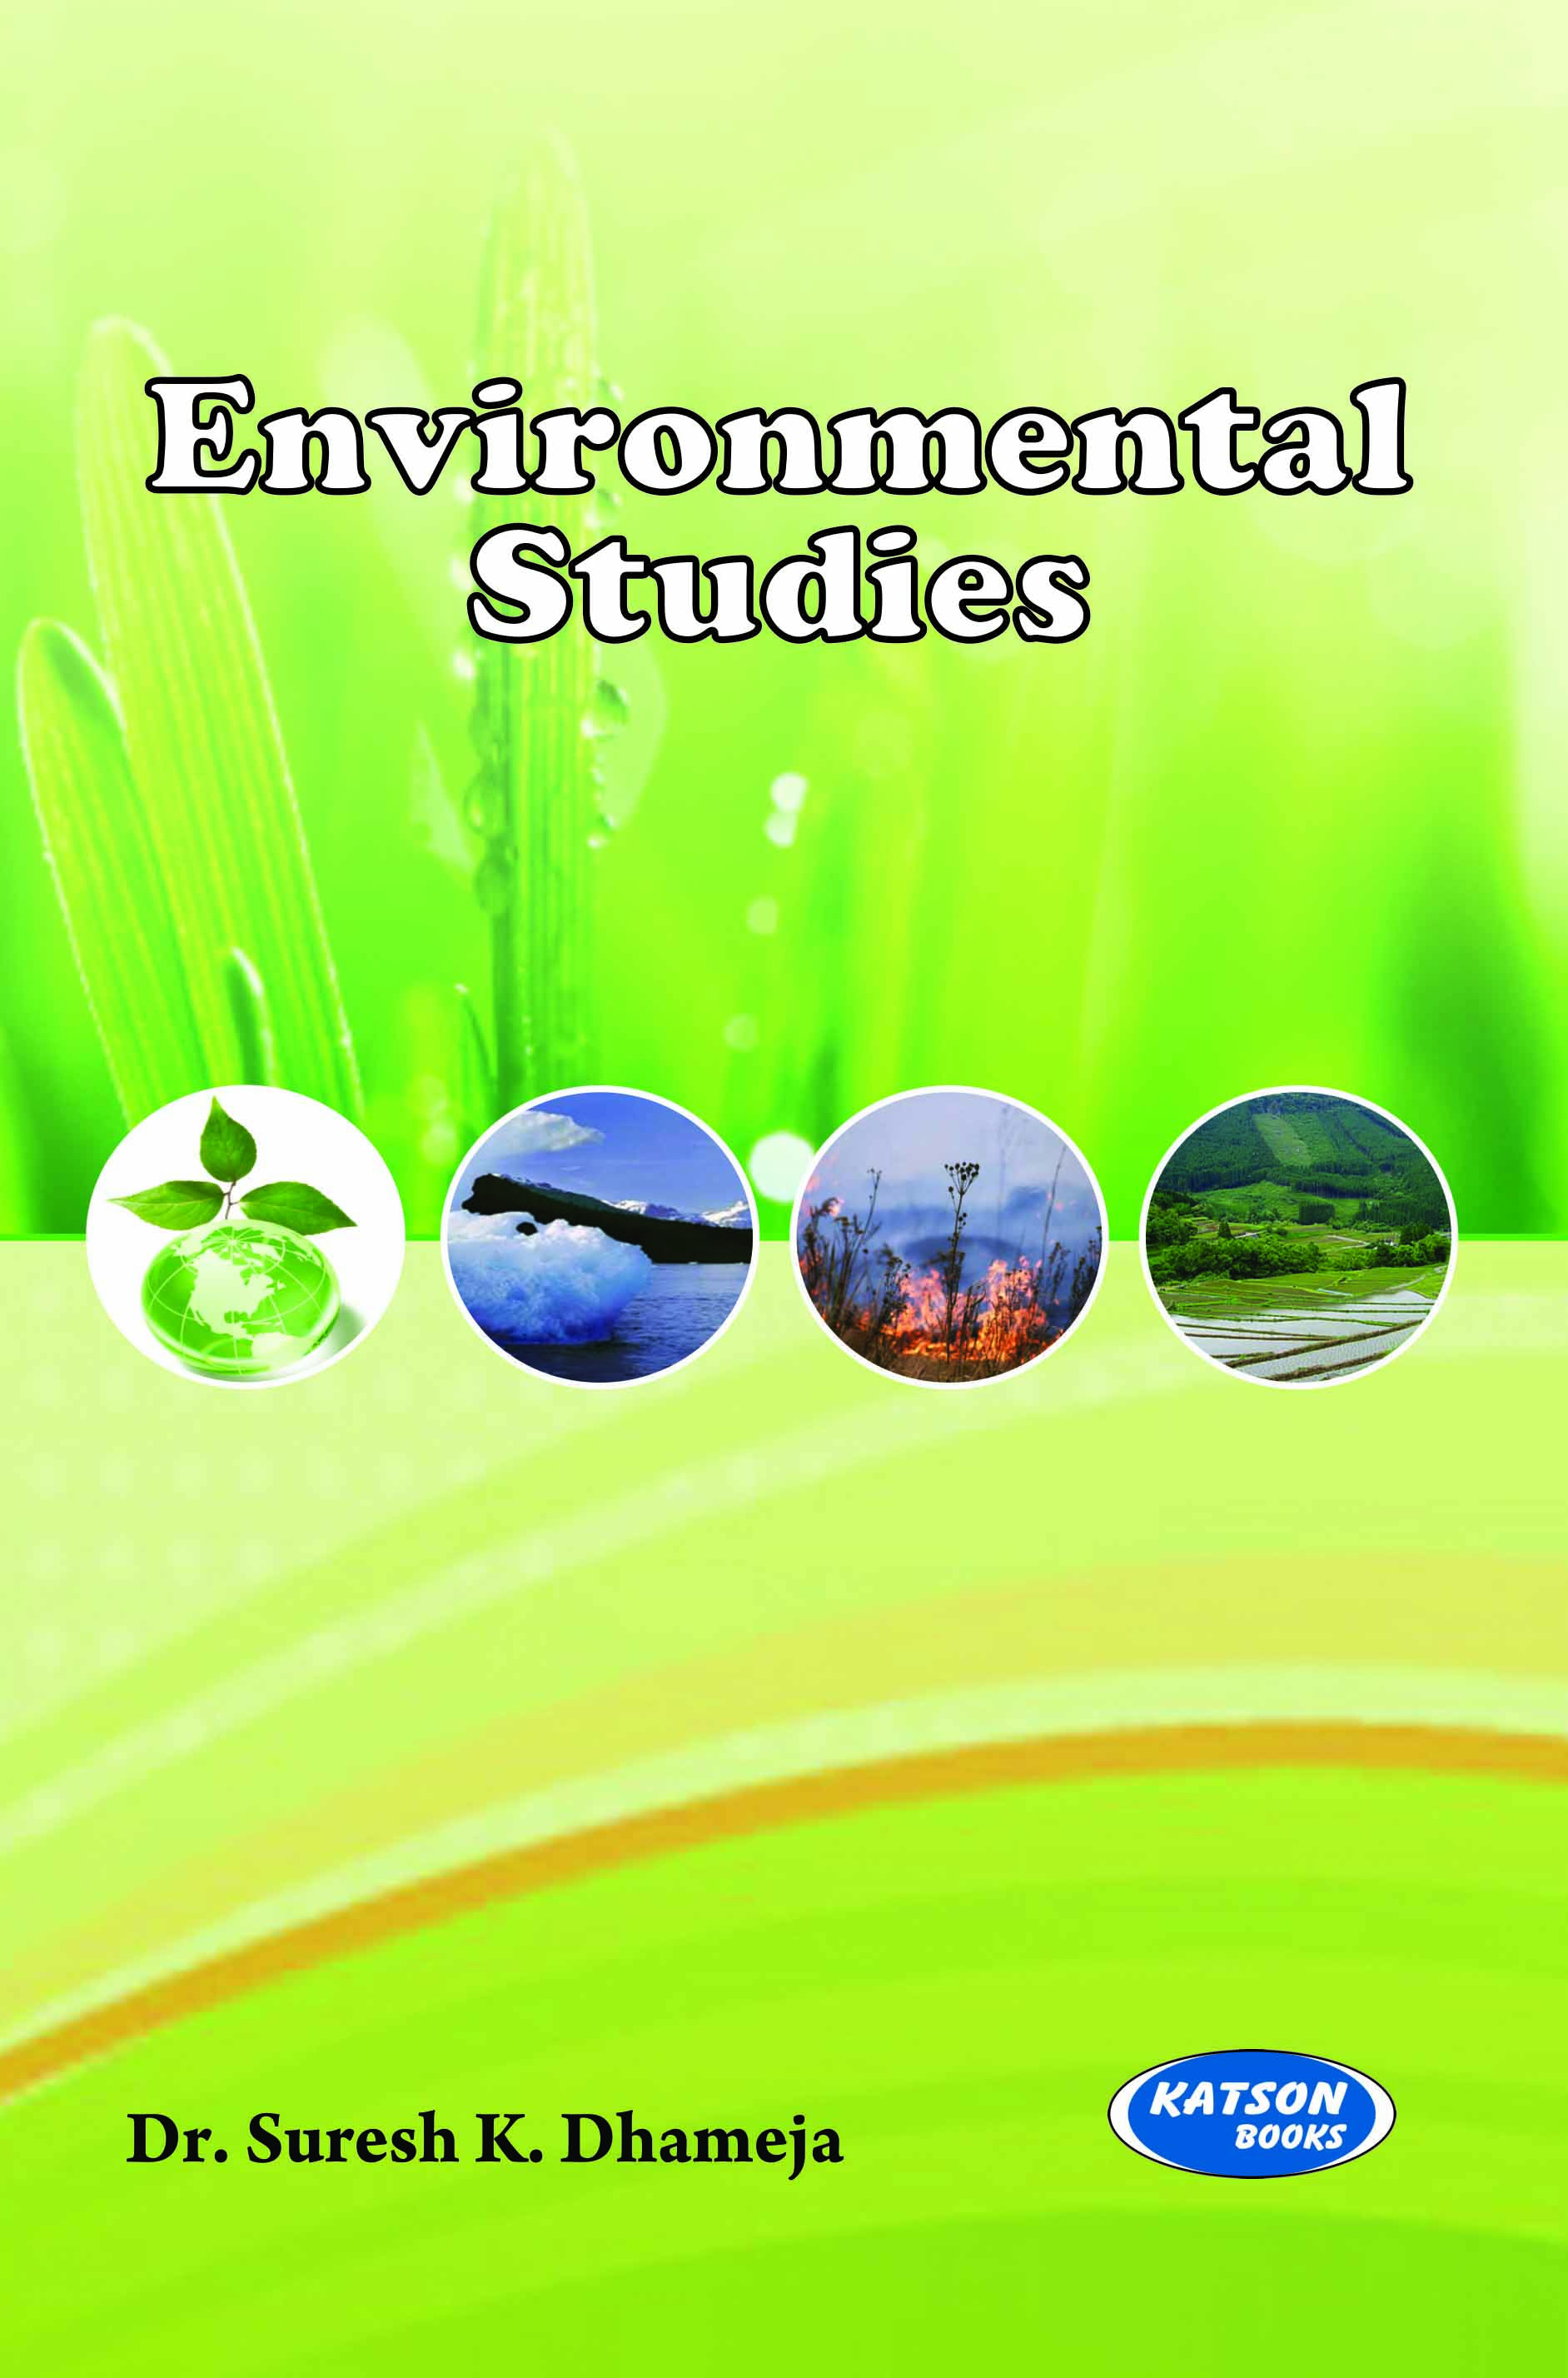 assignment on environmental studies